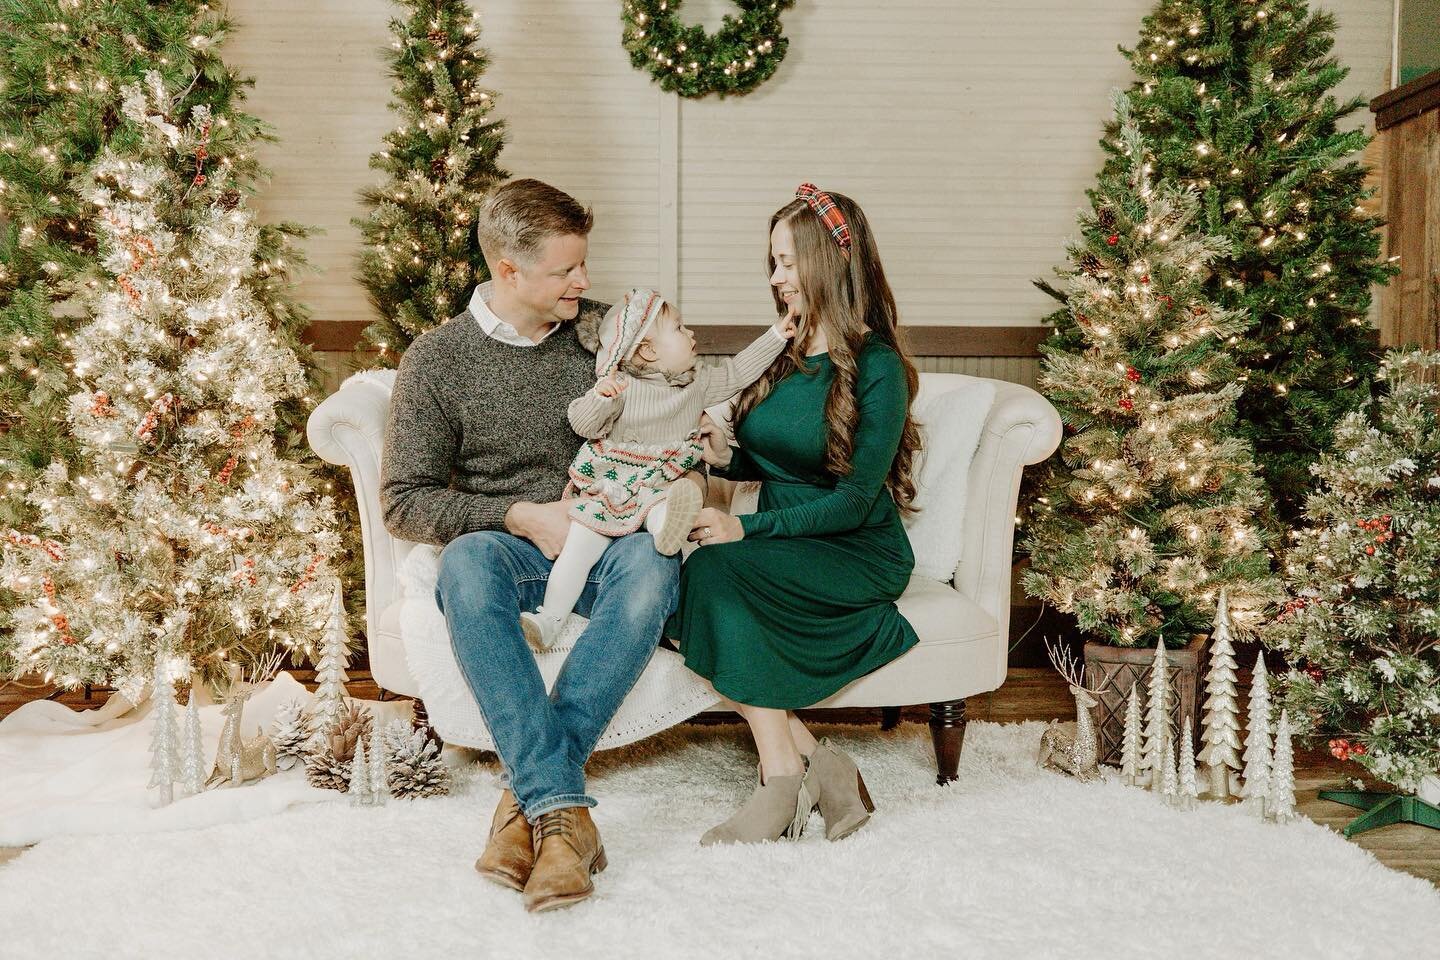 We are so honored to be offering Christmas minis this year in collaboration with @thegreenbackdepot  click the link in their bio to schedule your session within the next few Saturdays! This set up is so beautiful and makes for the perfect Christmas c